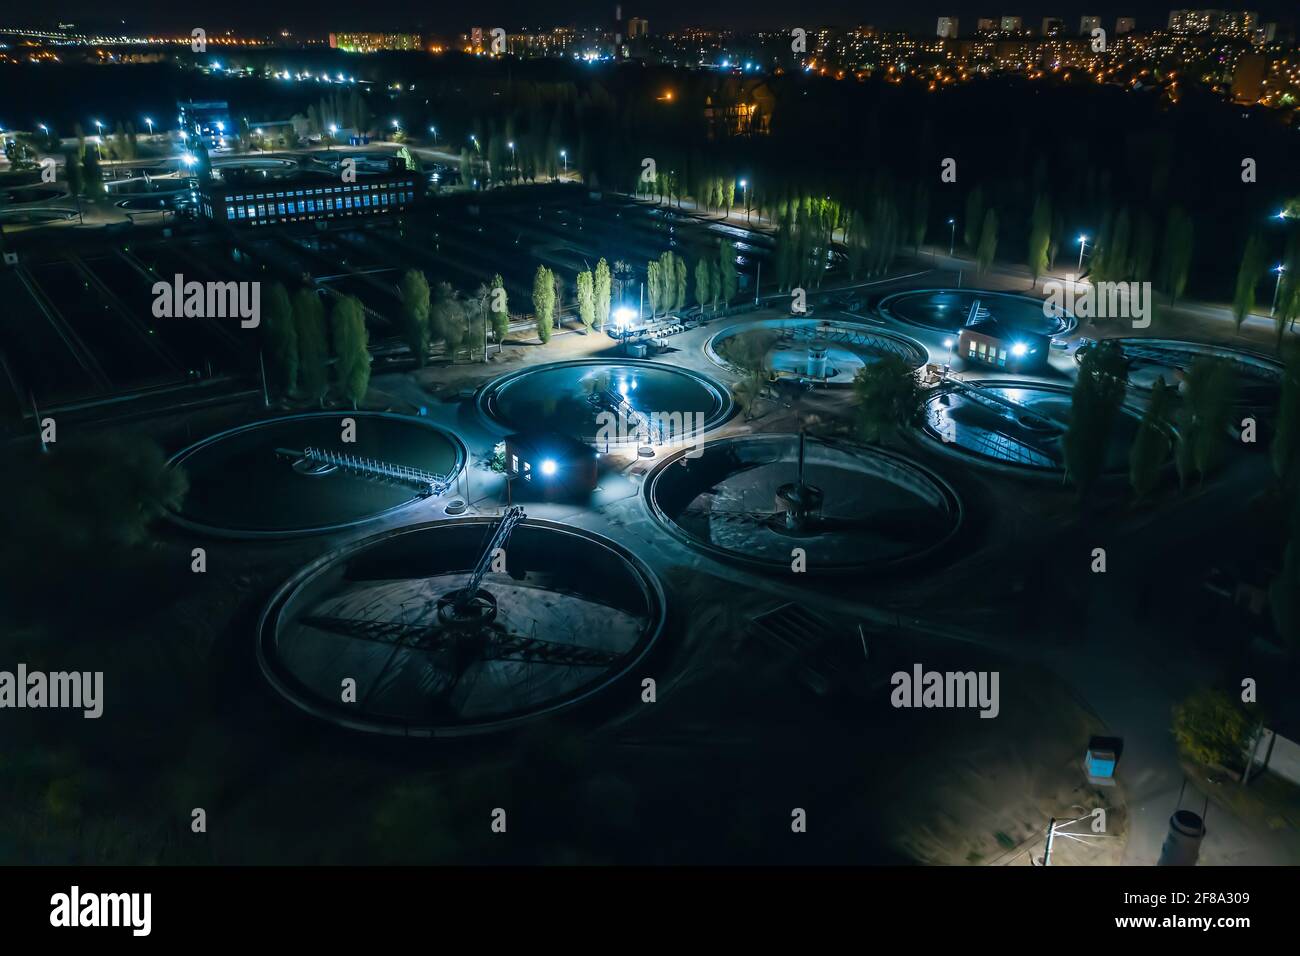 Modern wastewater treatment plant, aerial view at night. Tanks for aeration and purification of sewage. Stock Photo